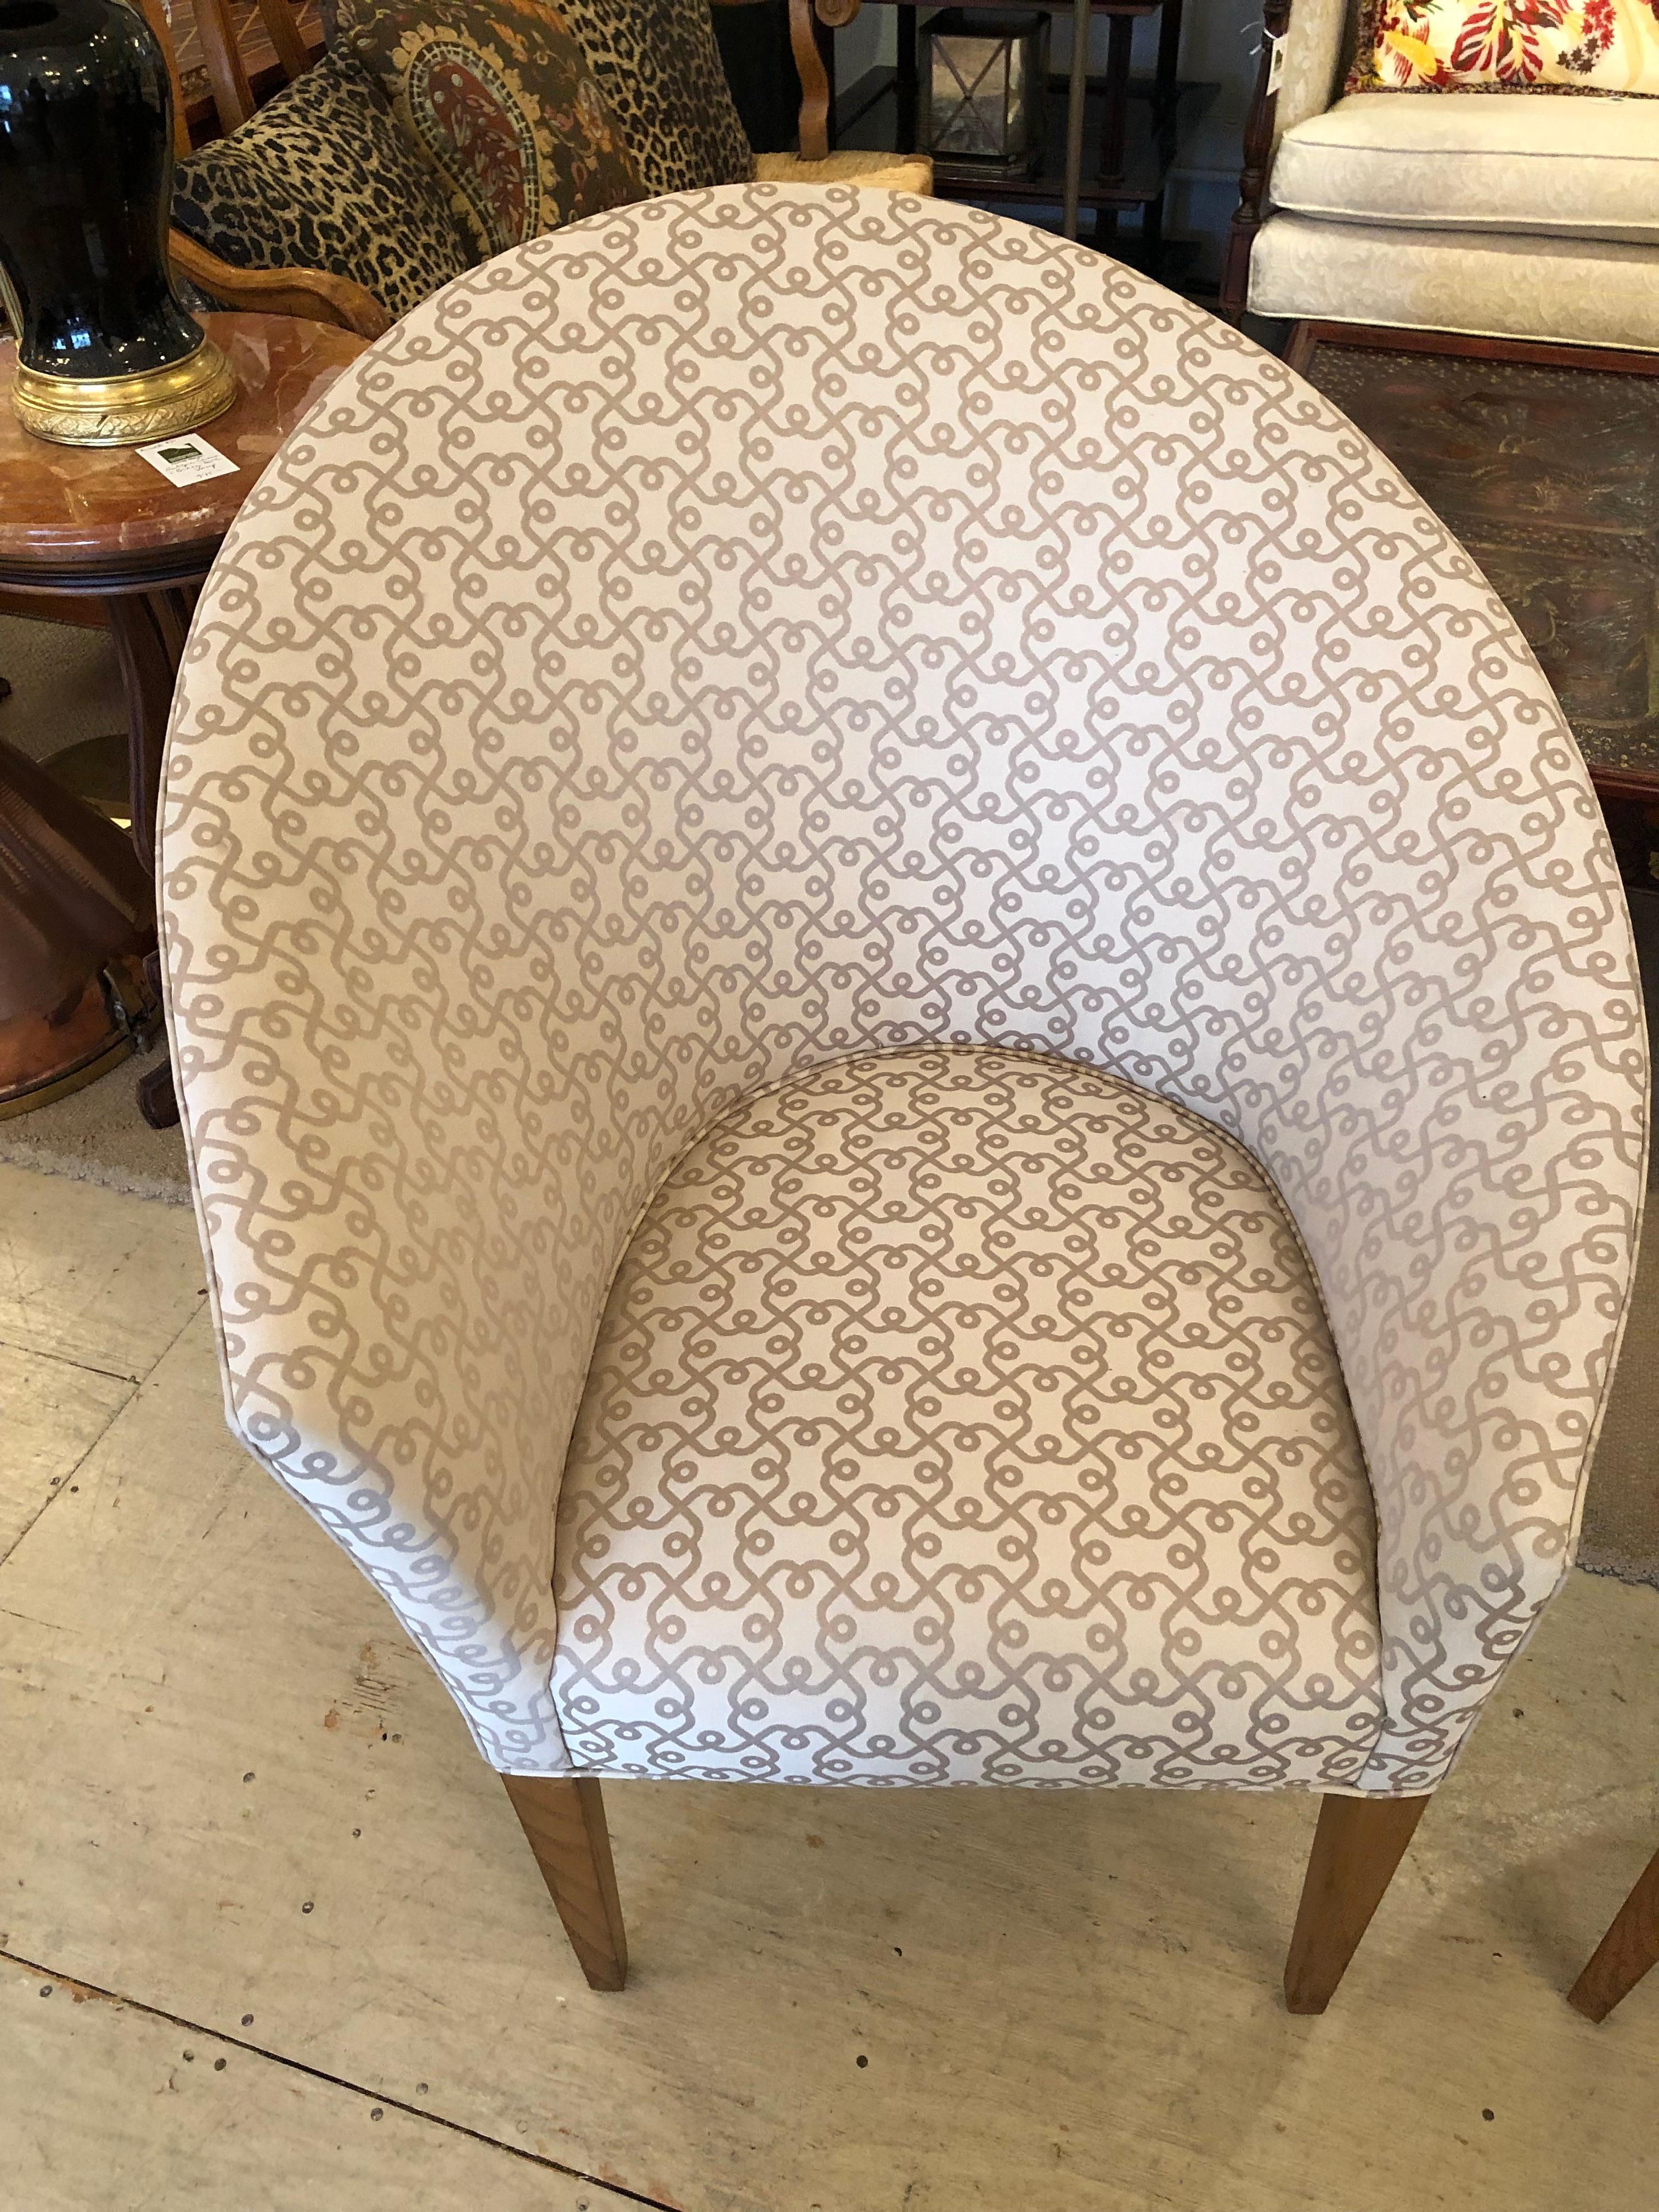 Very stylish asymmetrically shaped pair of sleek club chairs upholstered in a contemporary beige fabric with taupe squiggly lines. Modern tapered legs and very comfortable.
Measures: seat height 19, seat depth 19.5, arm height 30.